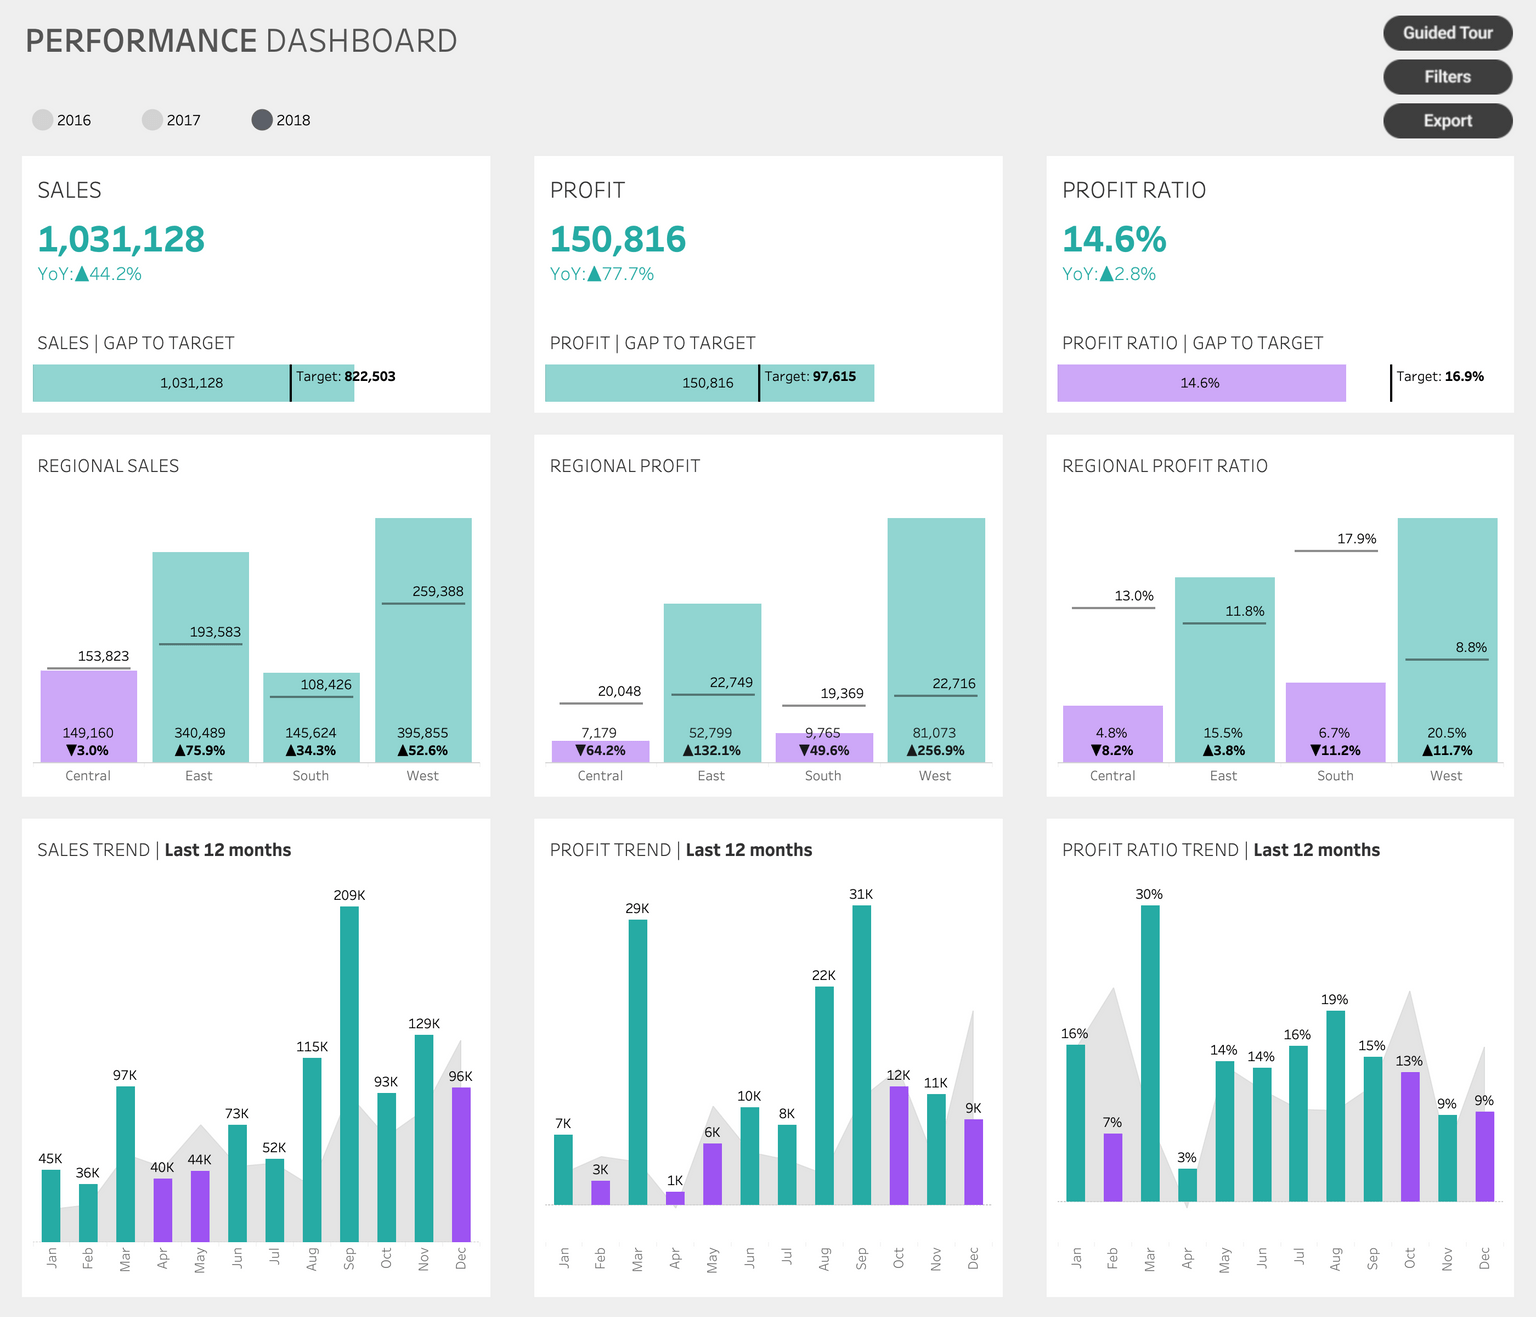 A sales performance dashboard with three main columns to for the KPIs showcased: sales value, profit and profit ratio. KPIs are compared to targets, compared on regional level. In addition there are trend chars for the last 12 months' performance.